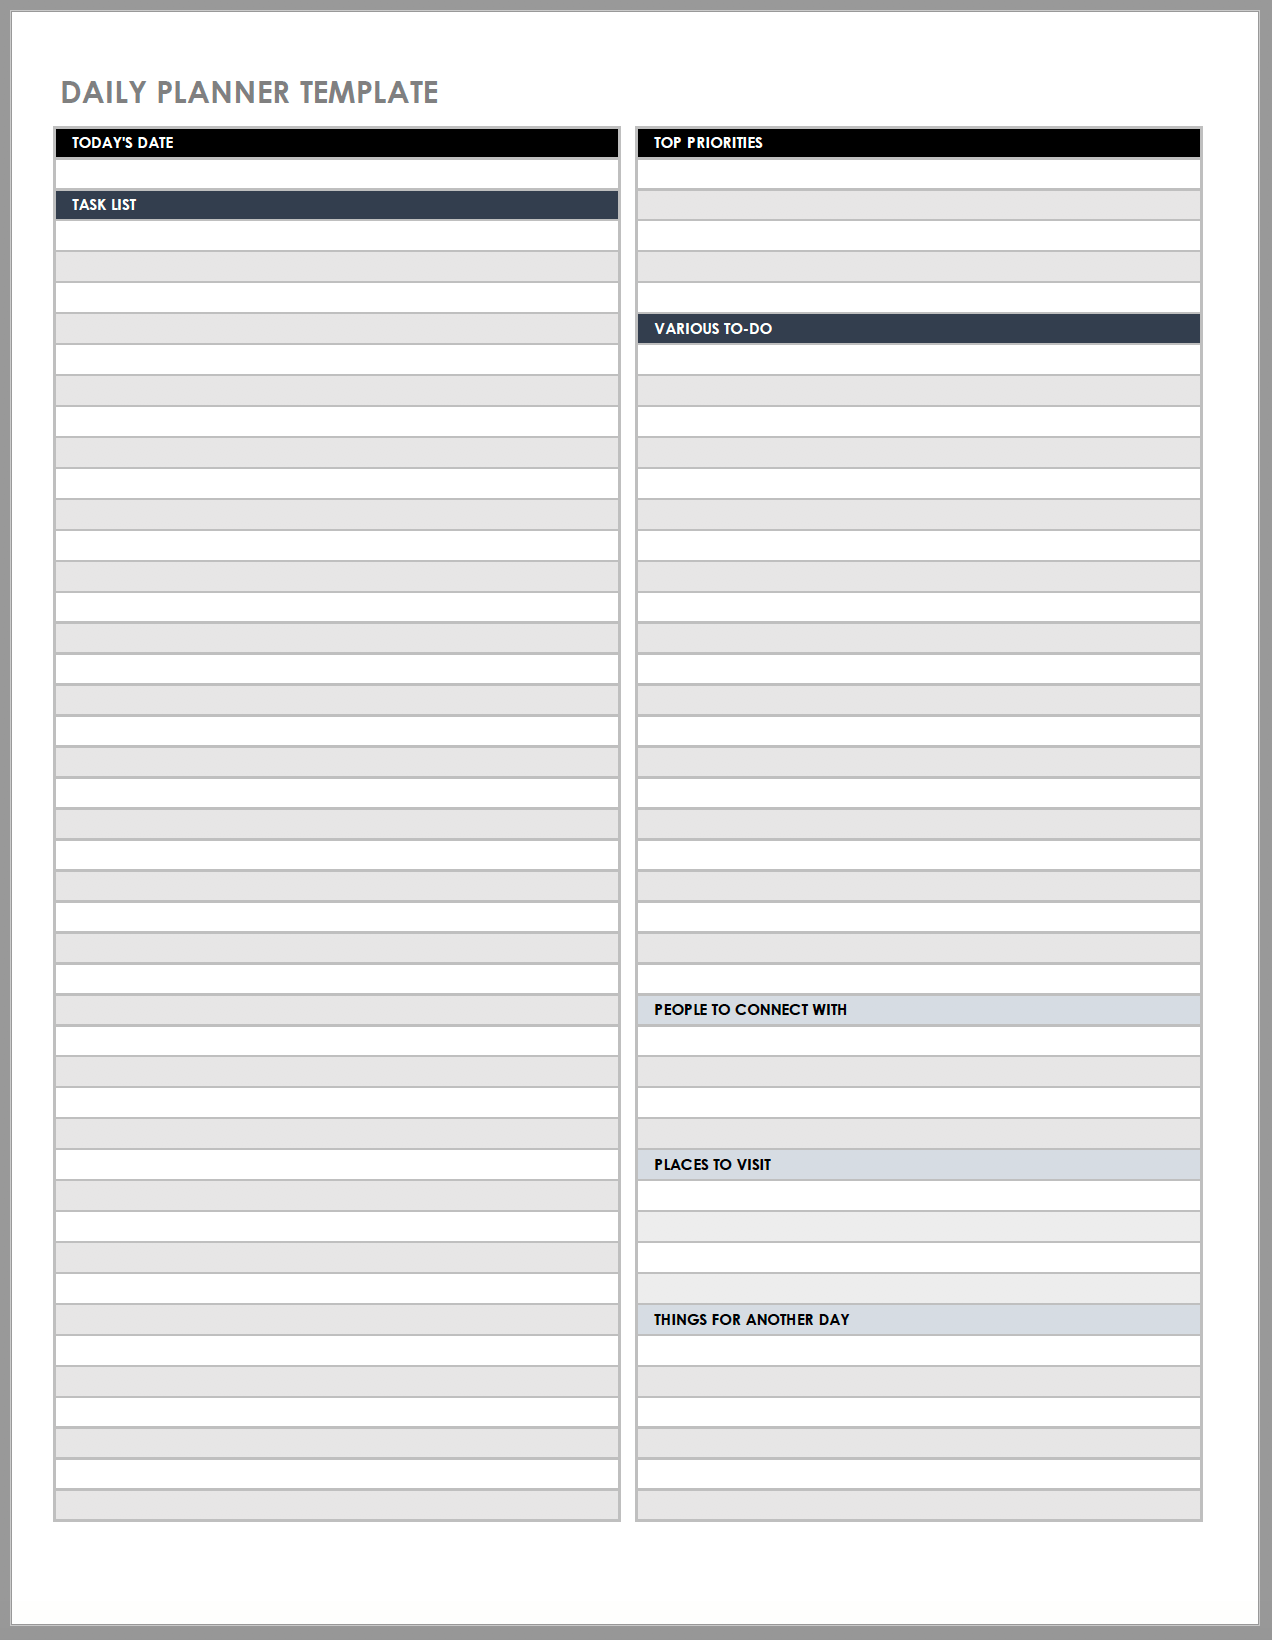 Daily Planner Template from www.smartsheet.com